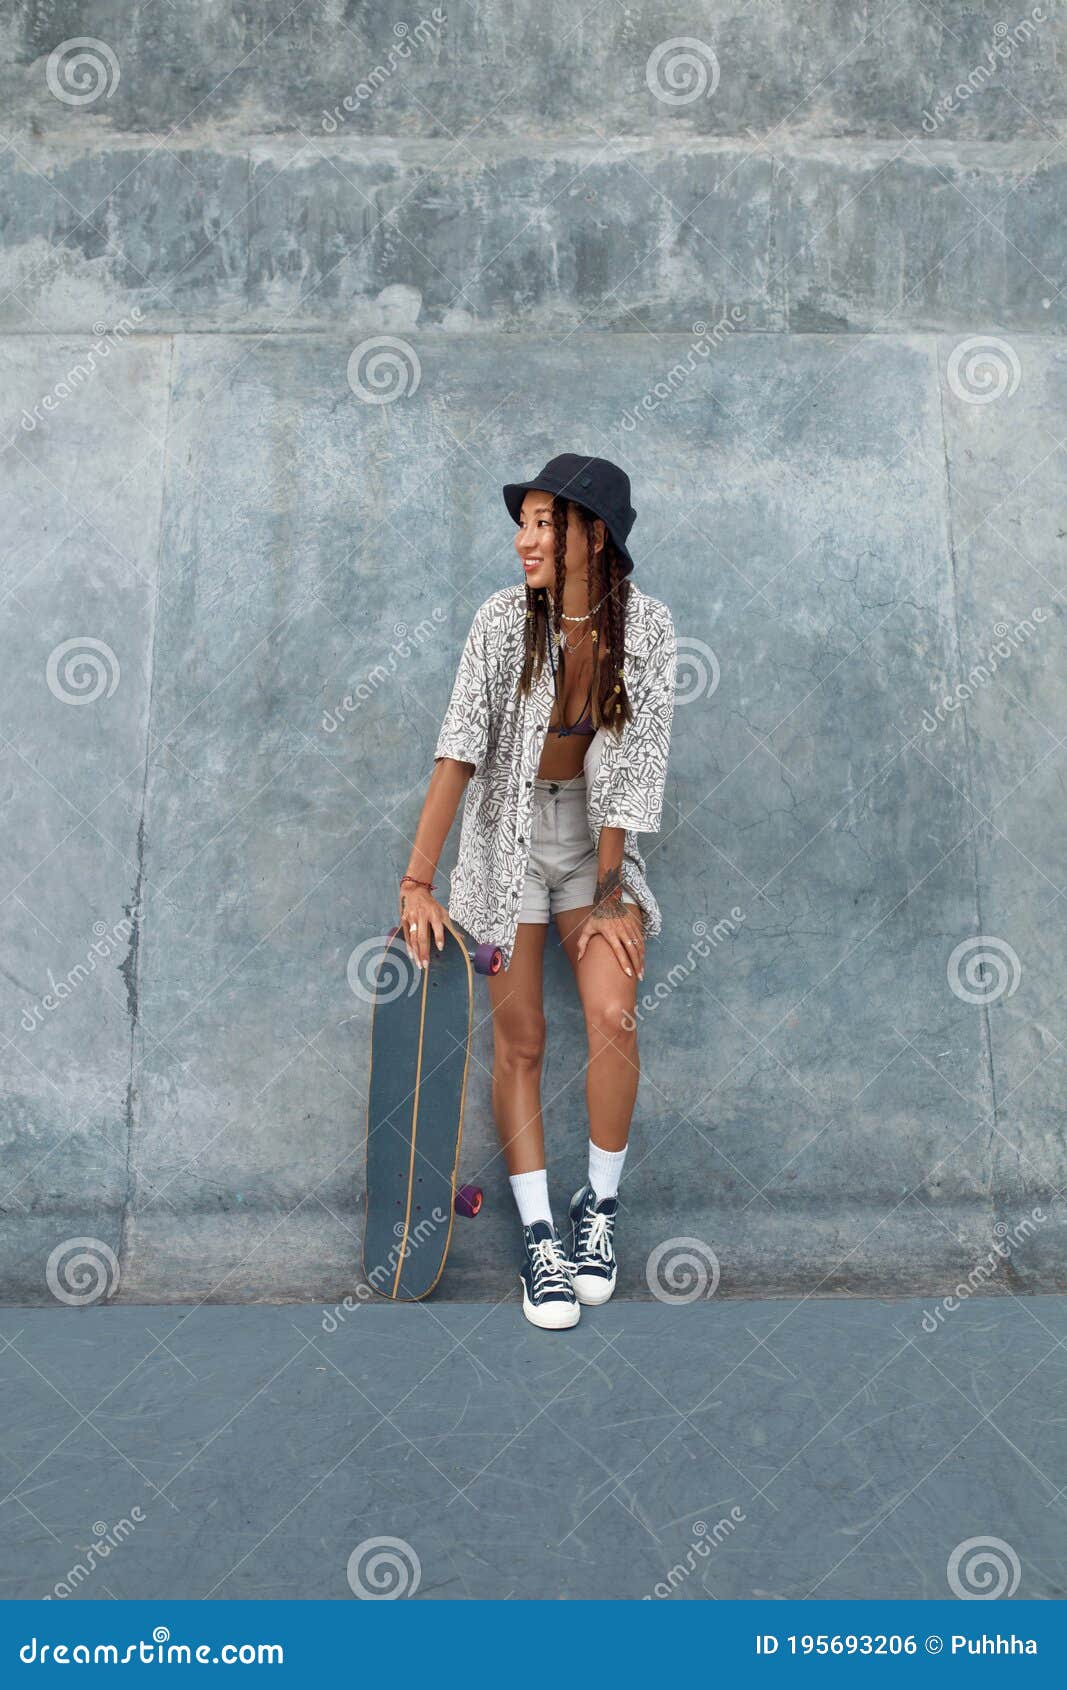 Skater Girl at Skatepark. Full-Length Portrait of Female Hipster in Casual  Outfit with Skateboard Against Concrete Wall. Stock Photo - Image of happy,  skate: 195693206